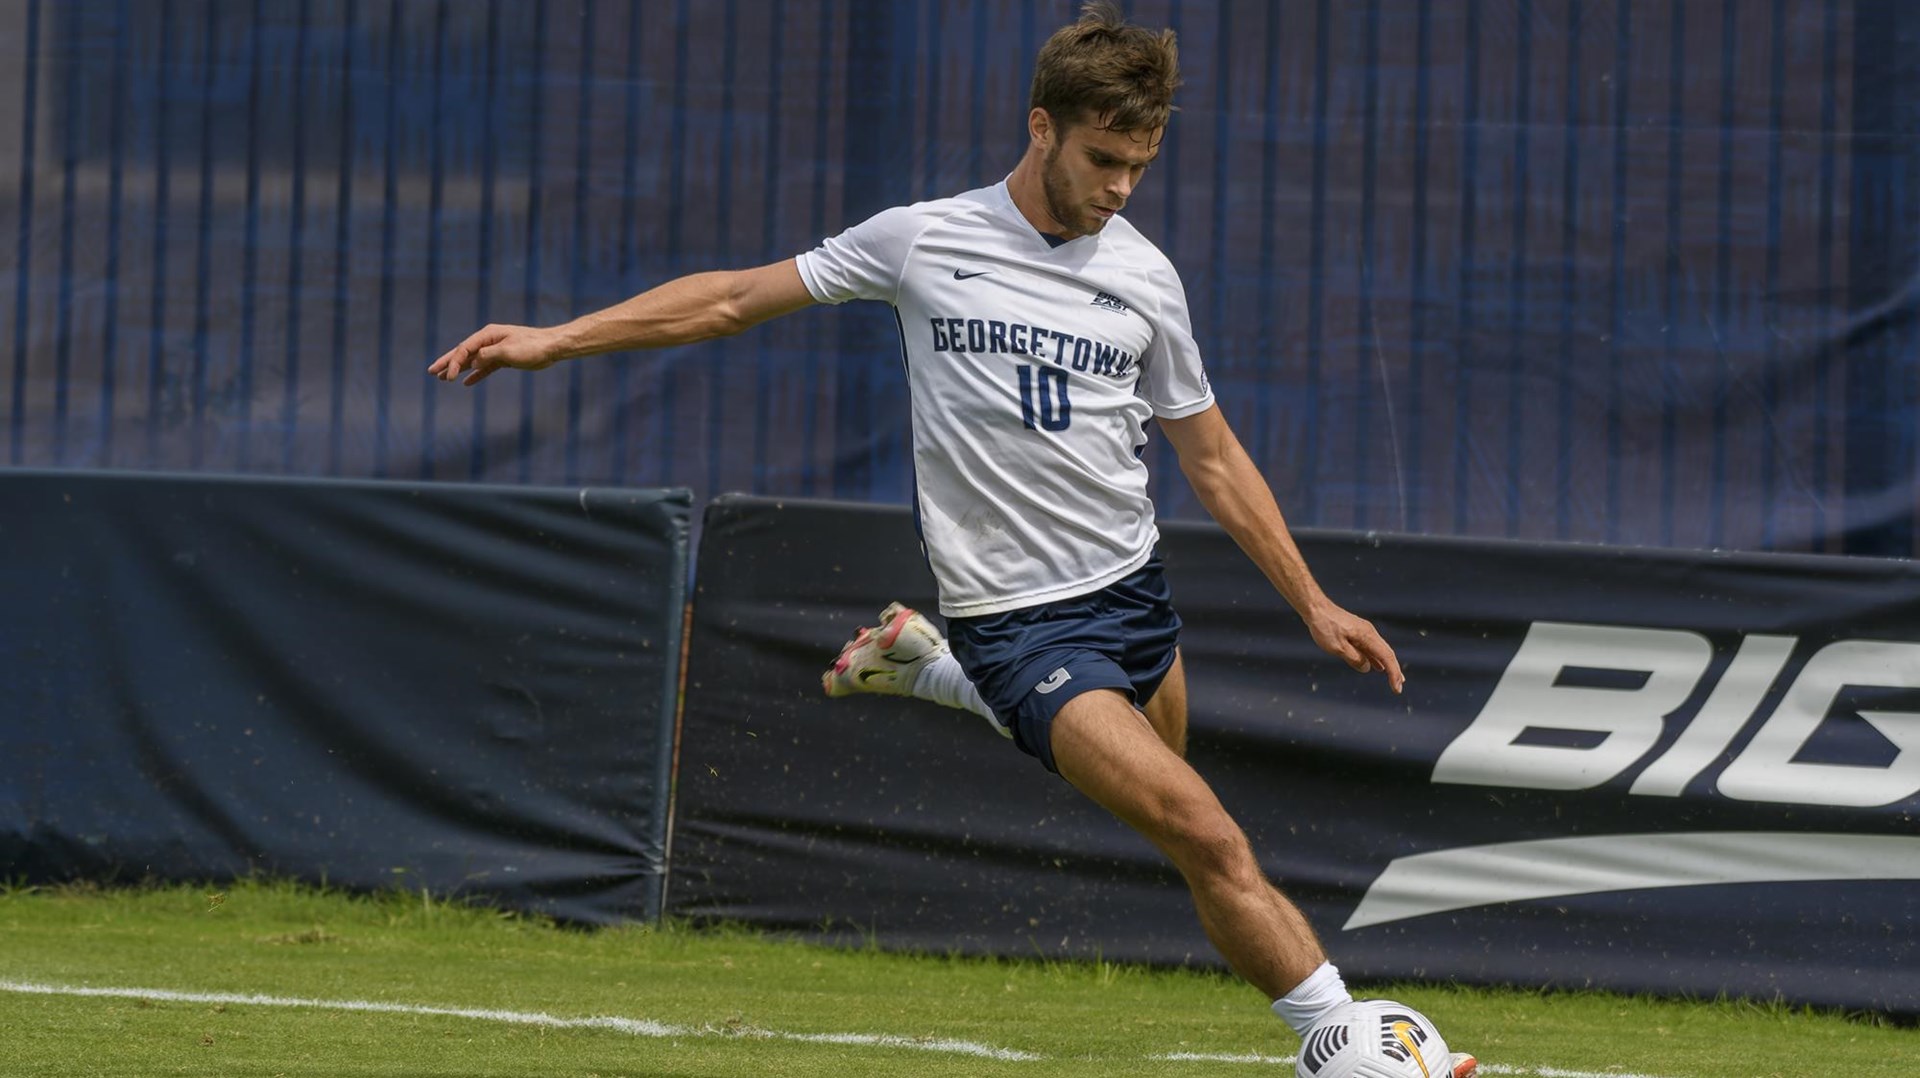 Georgetown's Will Sands joins Columbus Crew